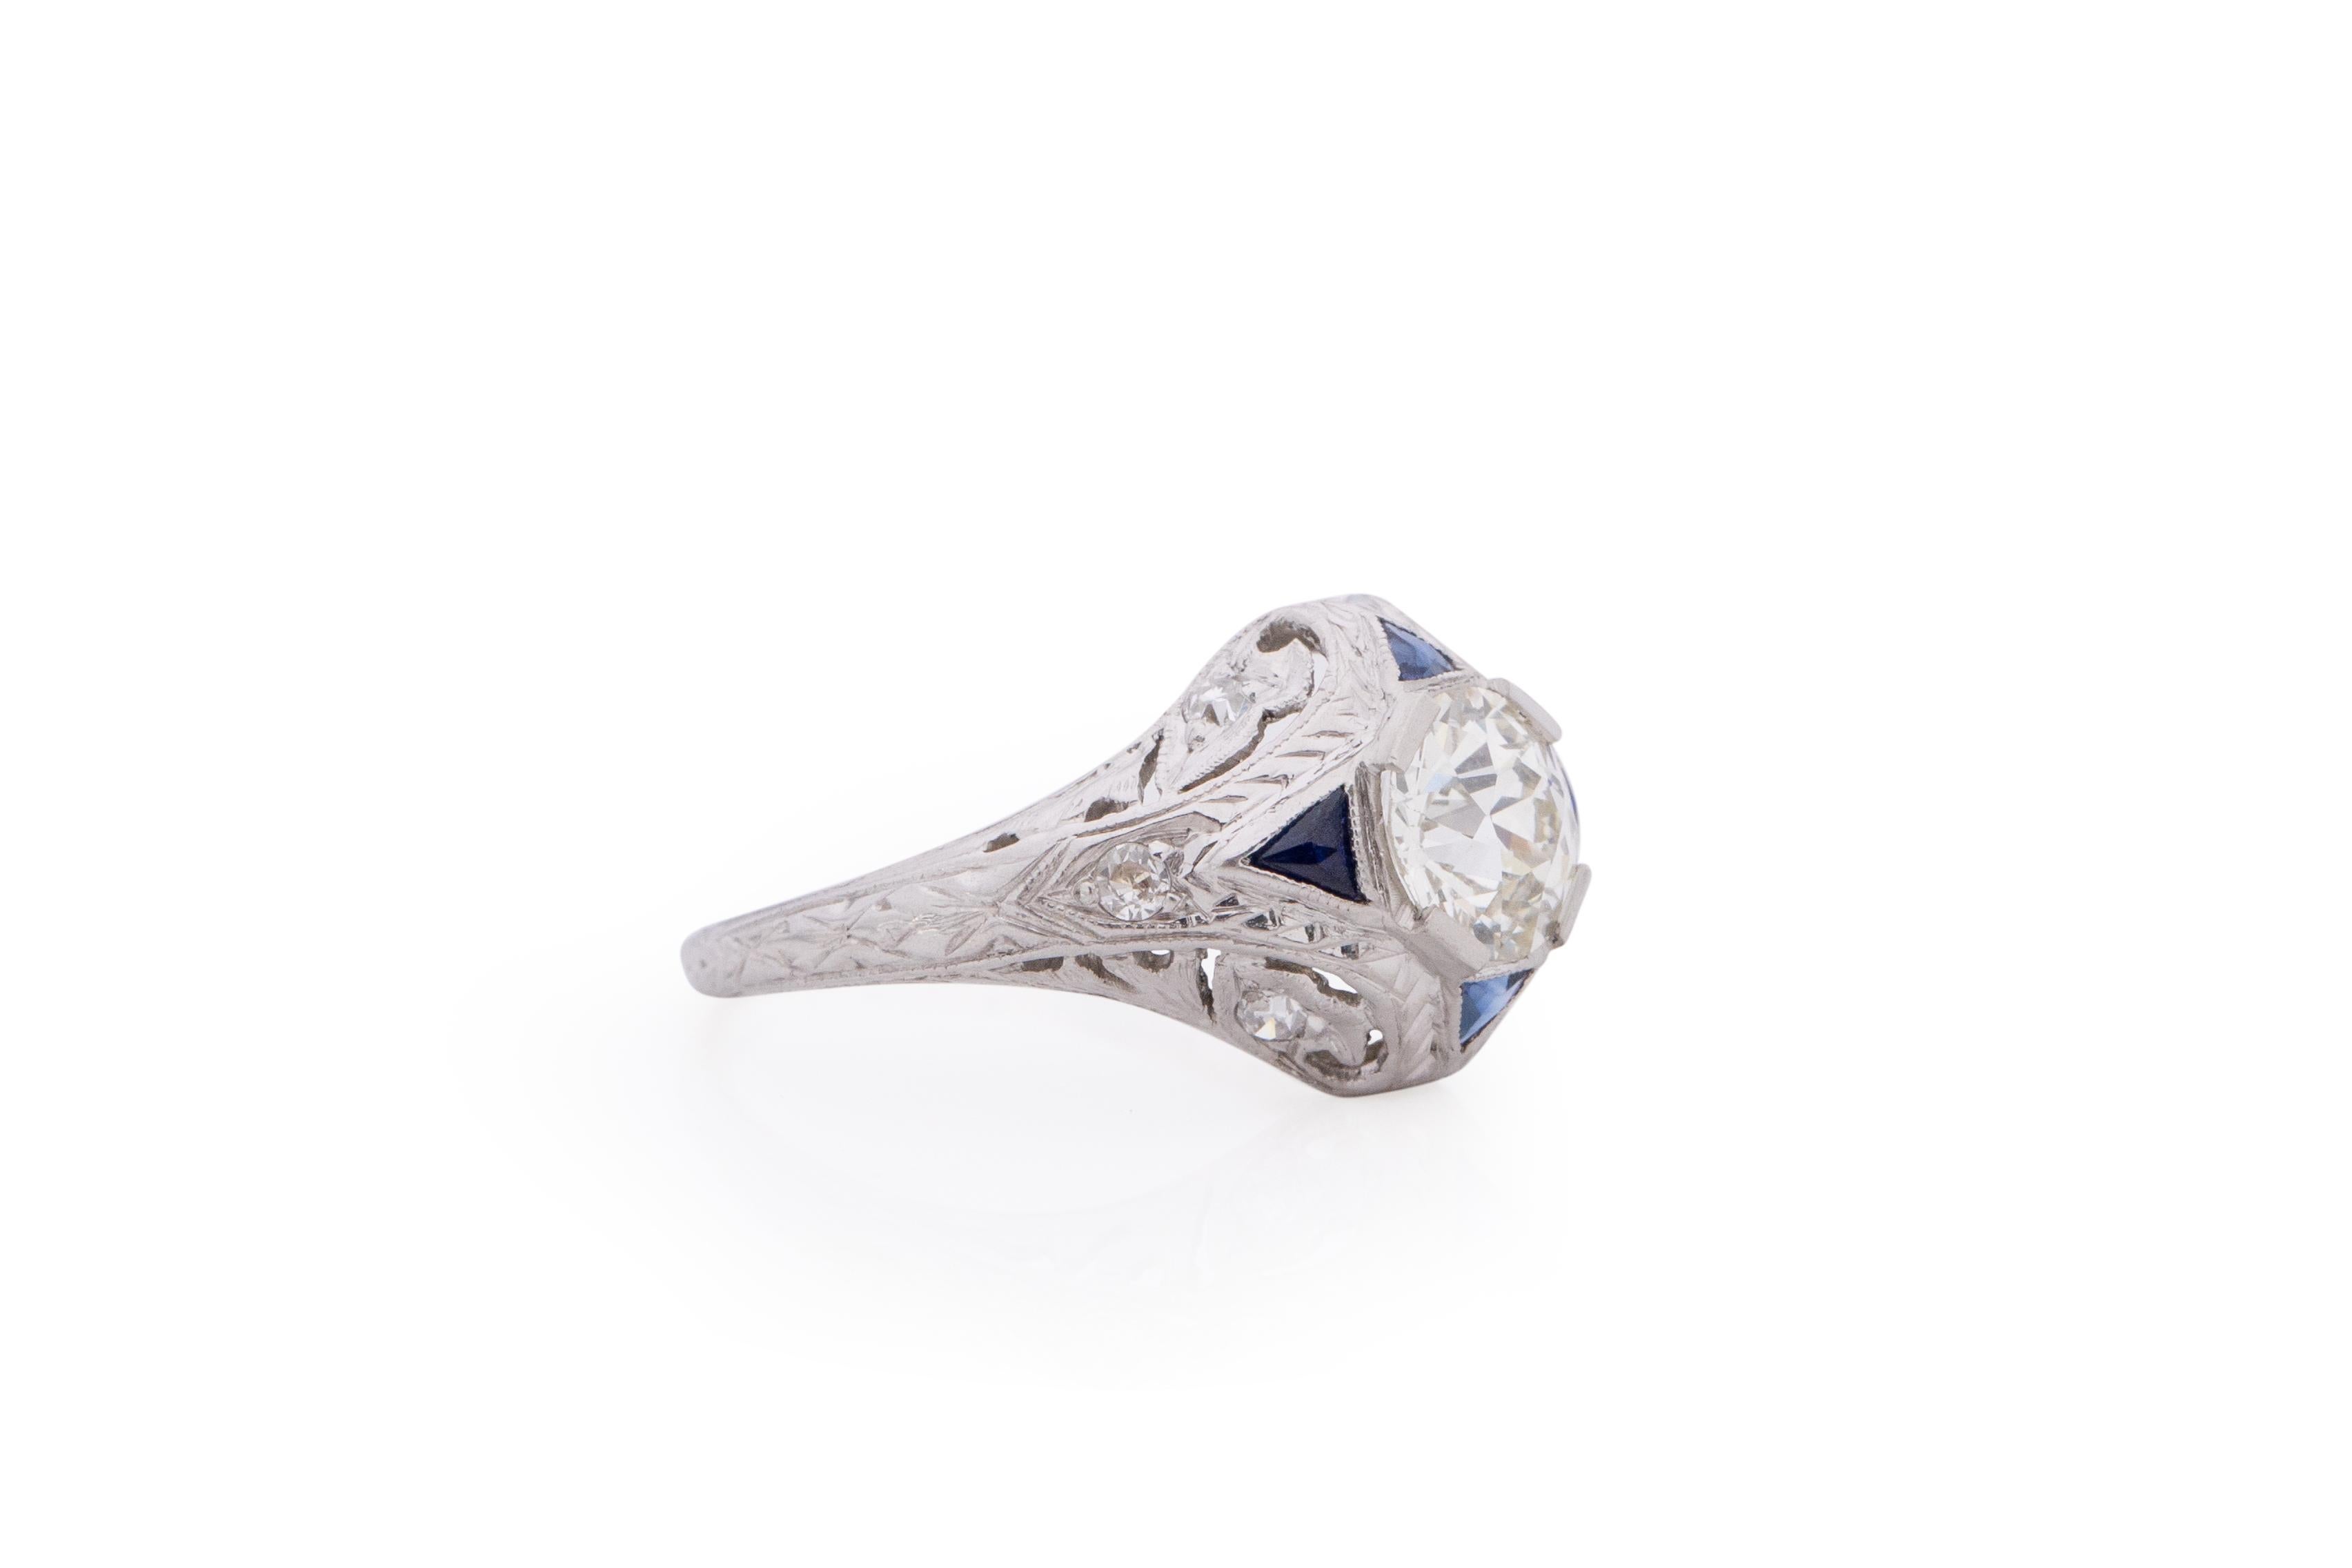 Item Details: 
Ring Size: 5.25
Metal Type: Platinum [Hallmarked, and Tested]
Weight: 2.0 dwt

Center Diamond Details:
GIA REPORT #: 2191947516
Weight: .91
Cut: Old European brilliant
Color: L
Clarity: VS2
Measurements: 6.22 x 6.09 x 4.03mm

Side